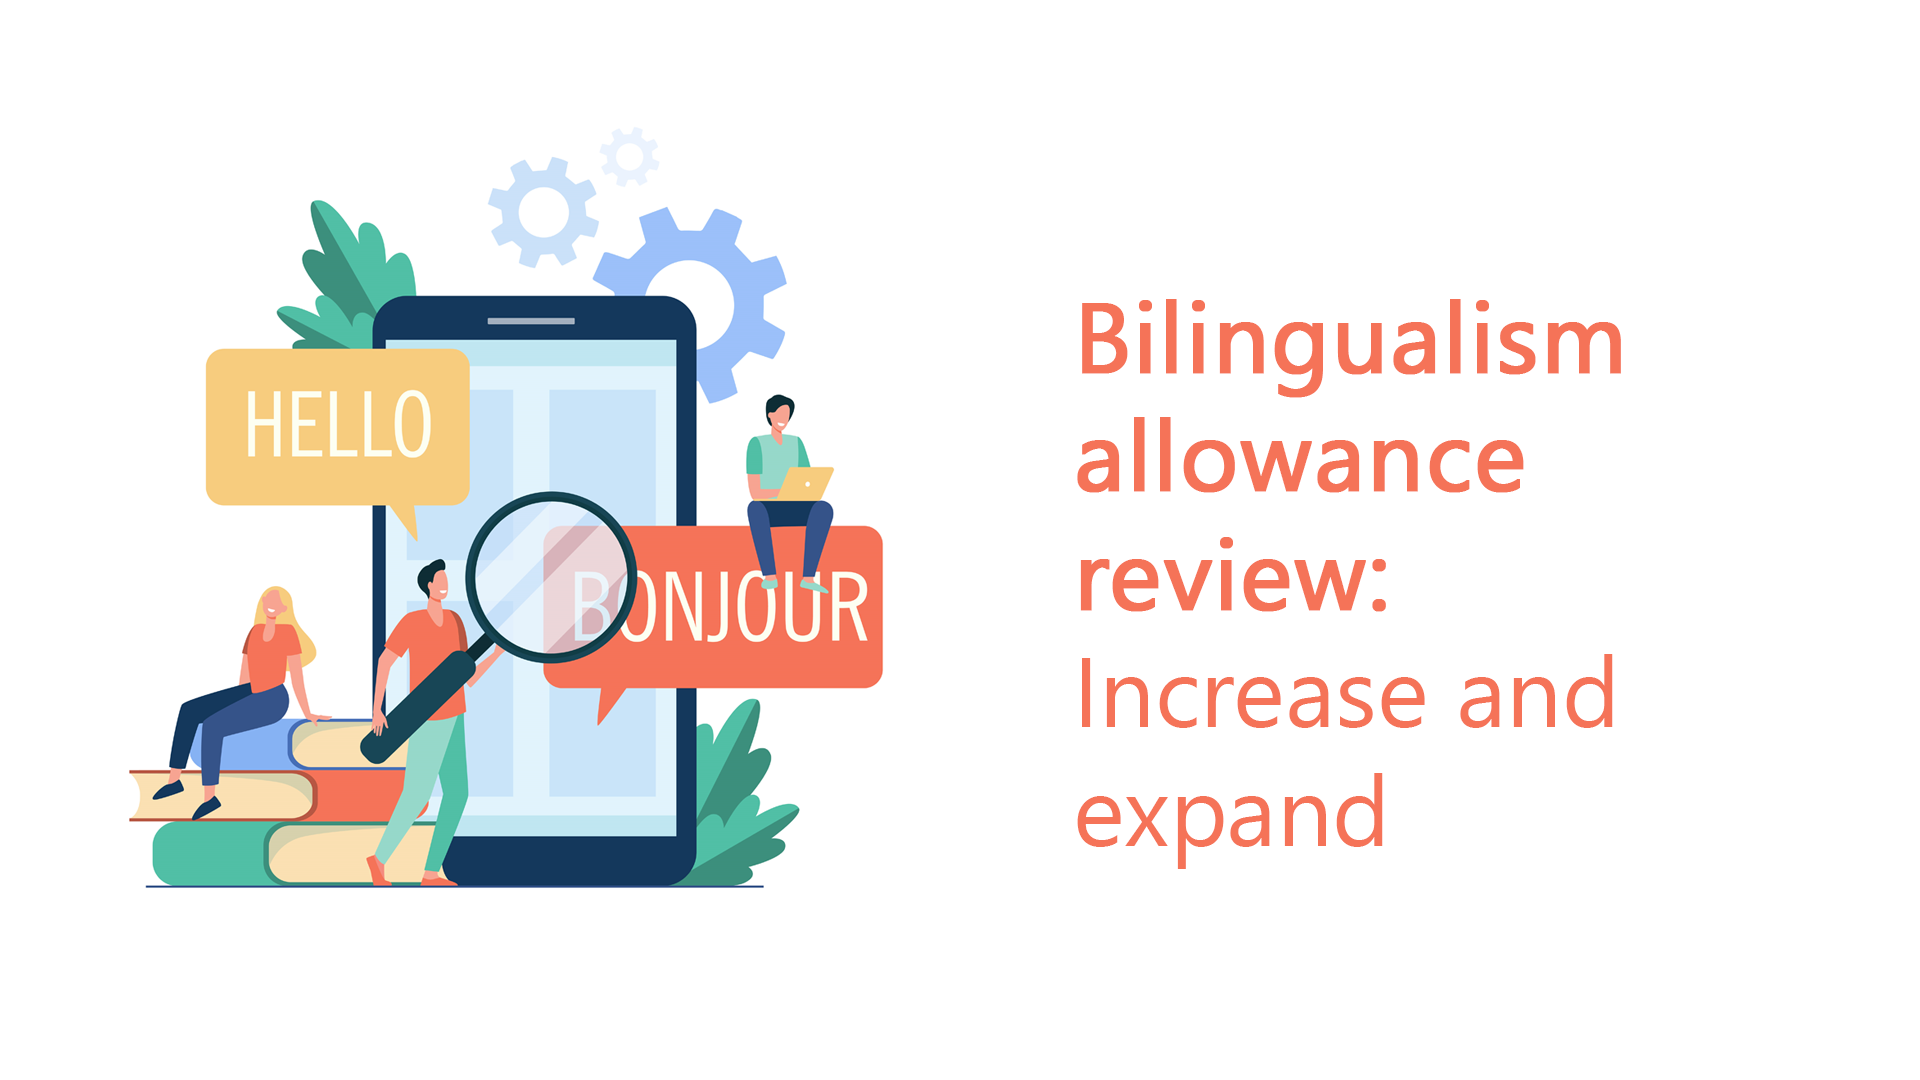 Bilingualism allowance review: Increase and expand